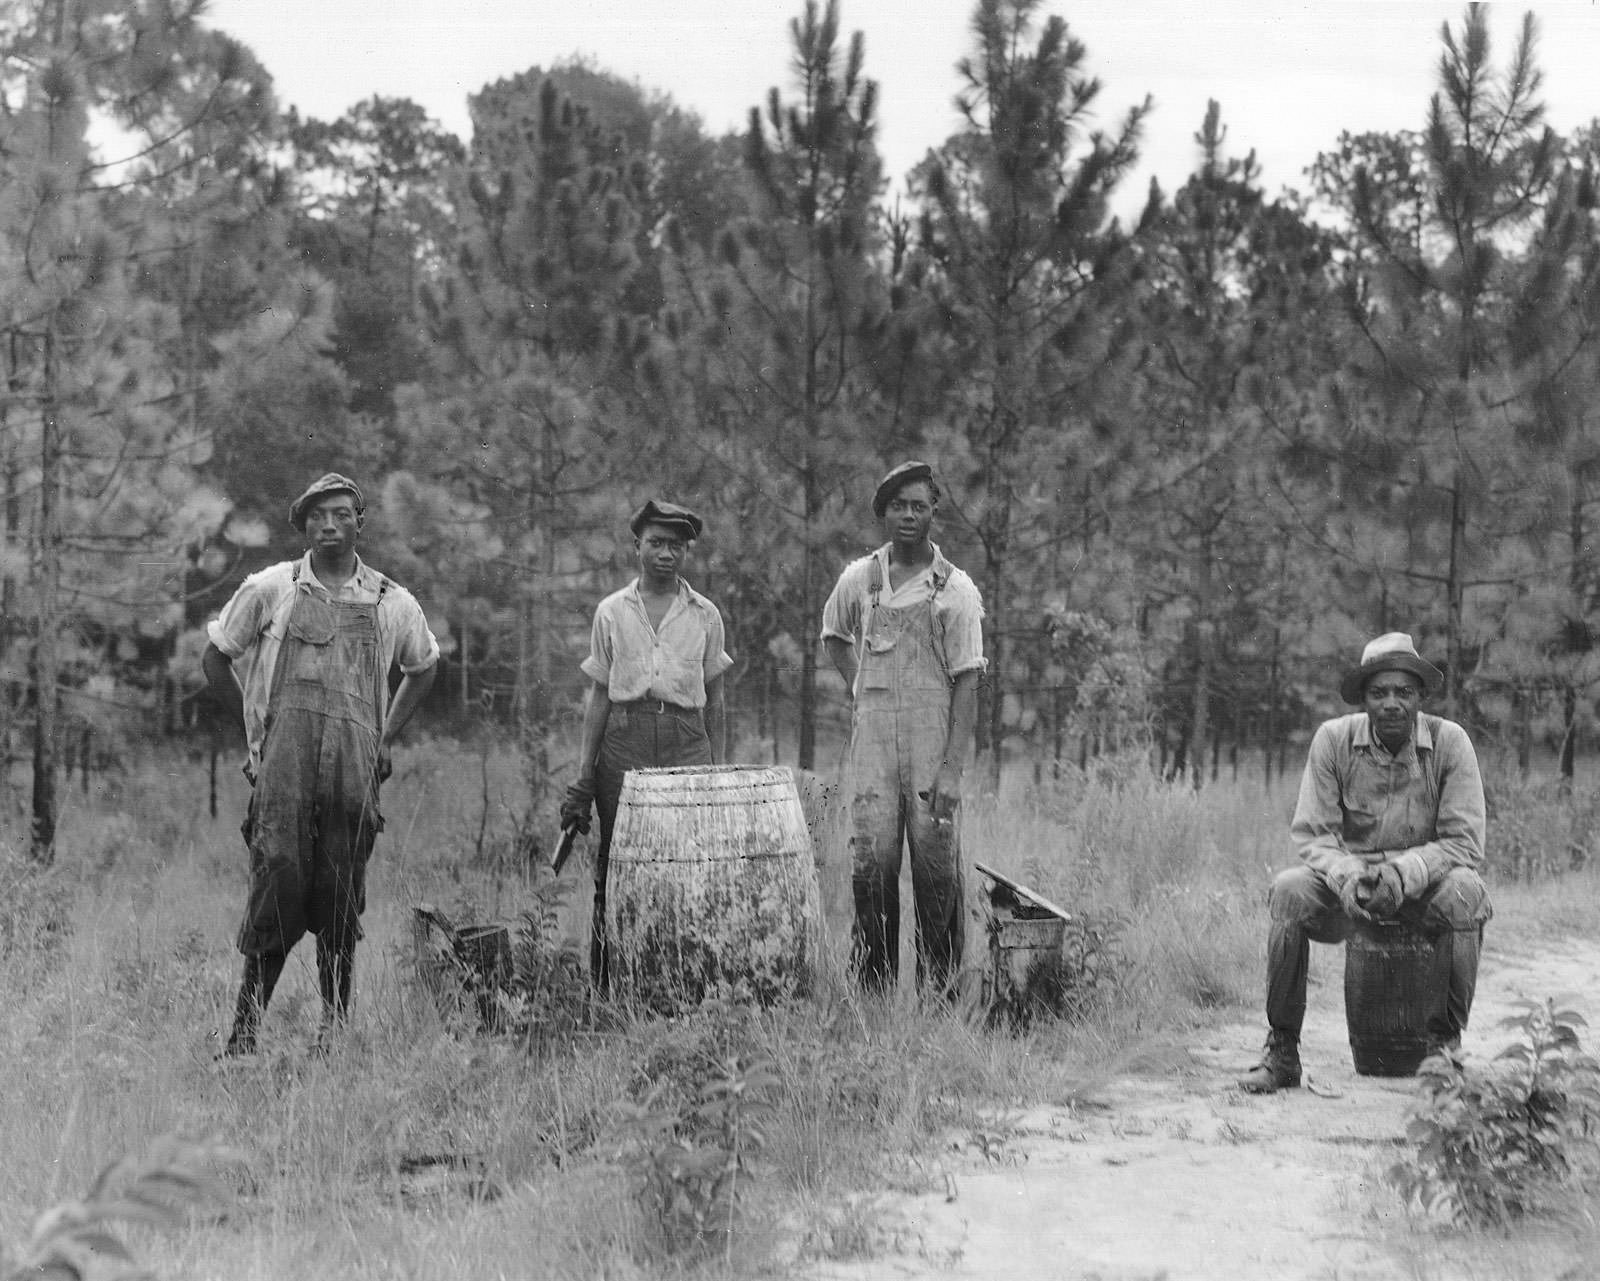 Workers extracting turpentine in a Georgia forest, 1930s